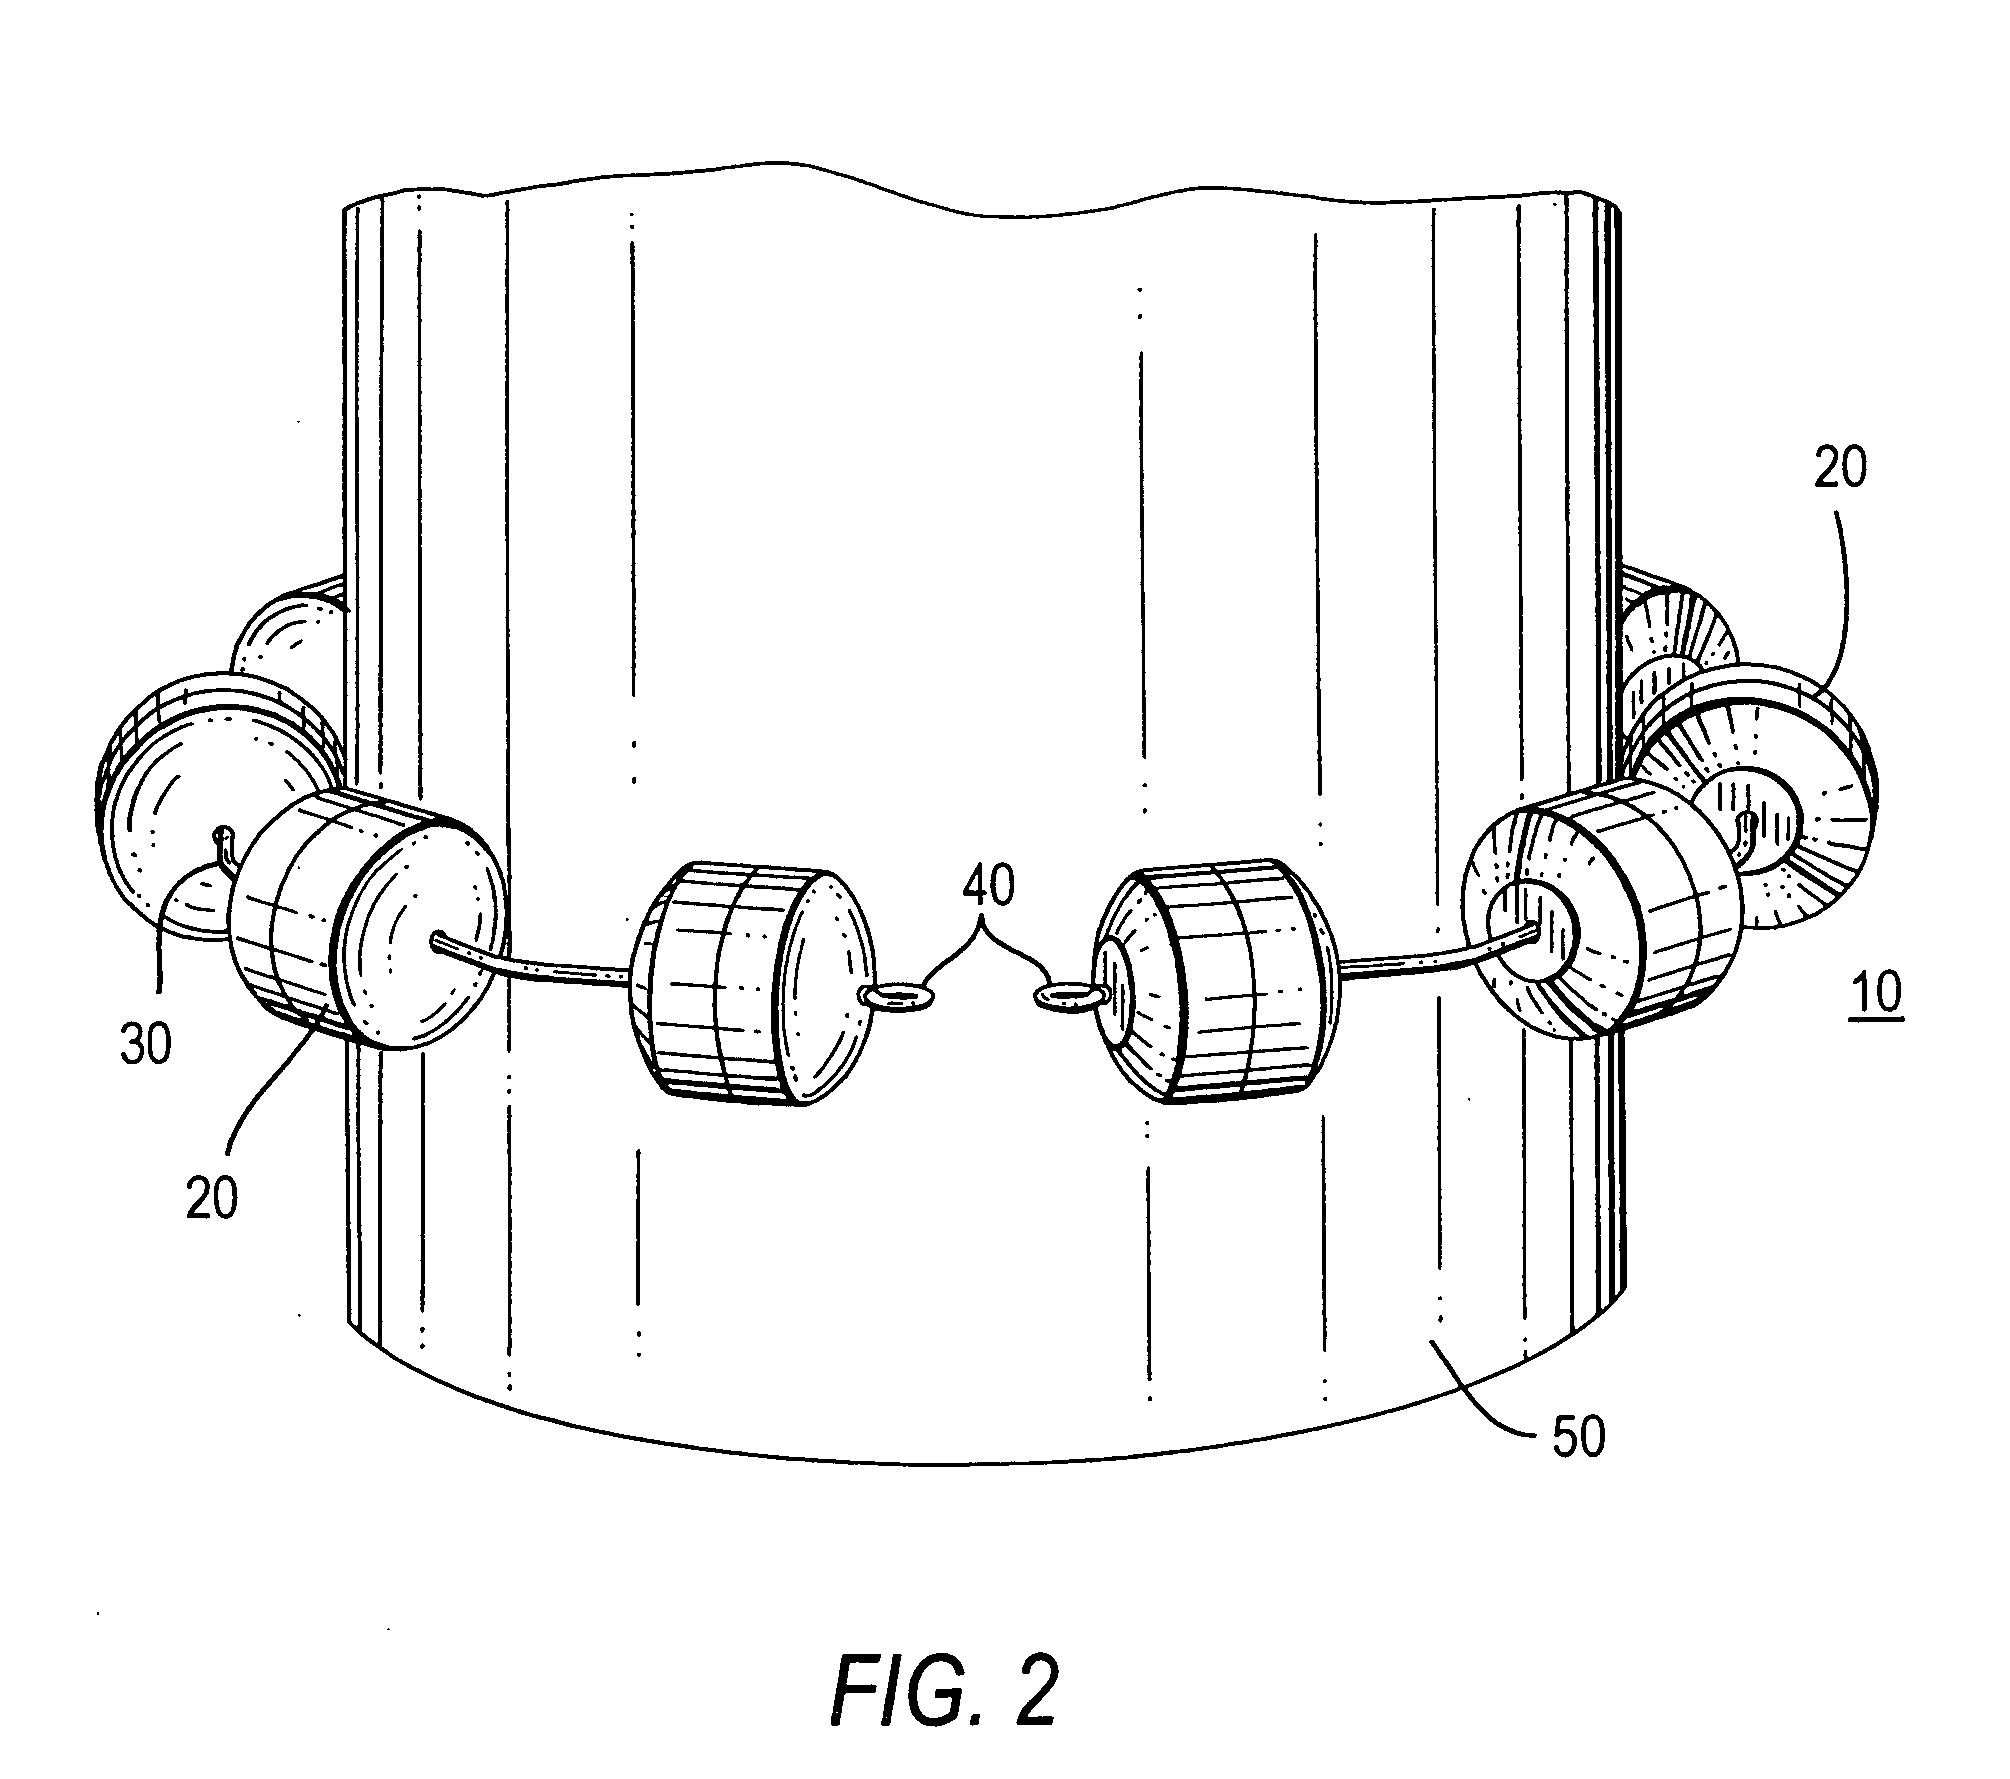 Methods and apparatus for treating body tissue sphincters and the like